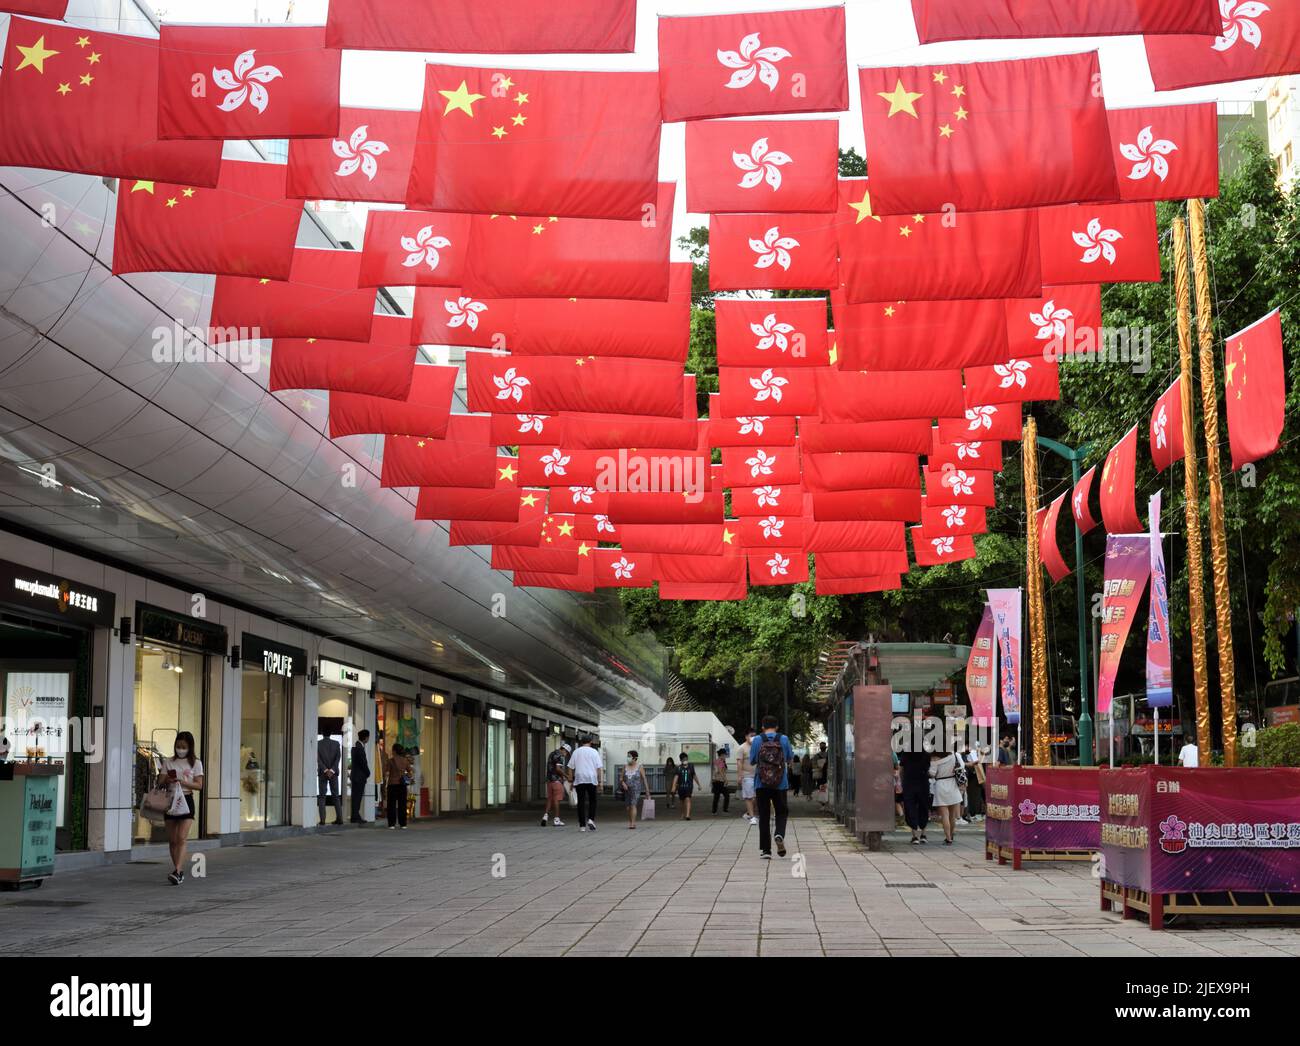 Decoration on street for the celebration of 25th anniversary of the establishment of Hong Kong SAR China Stock Photo